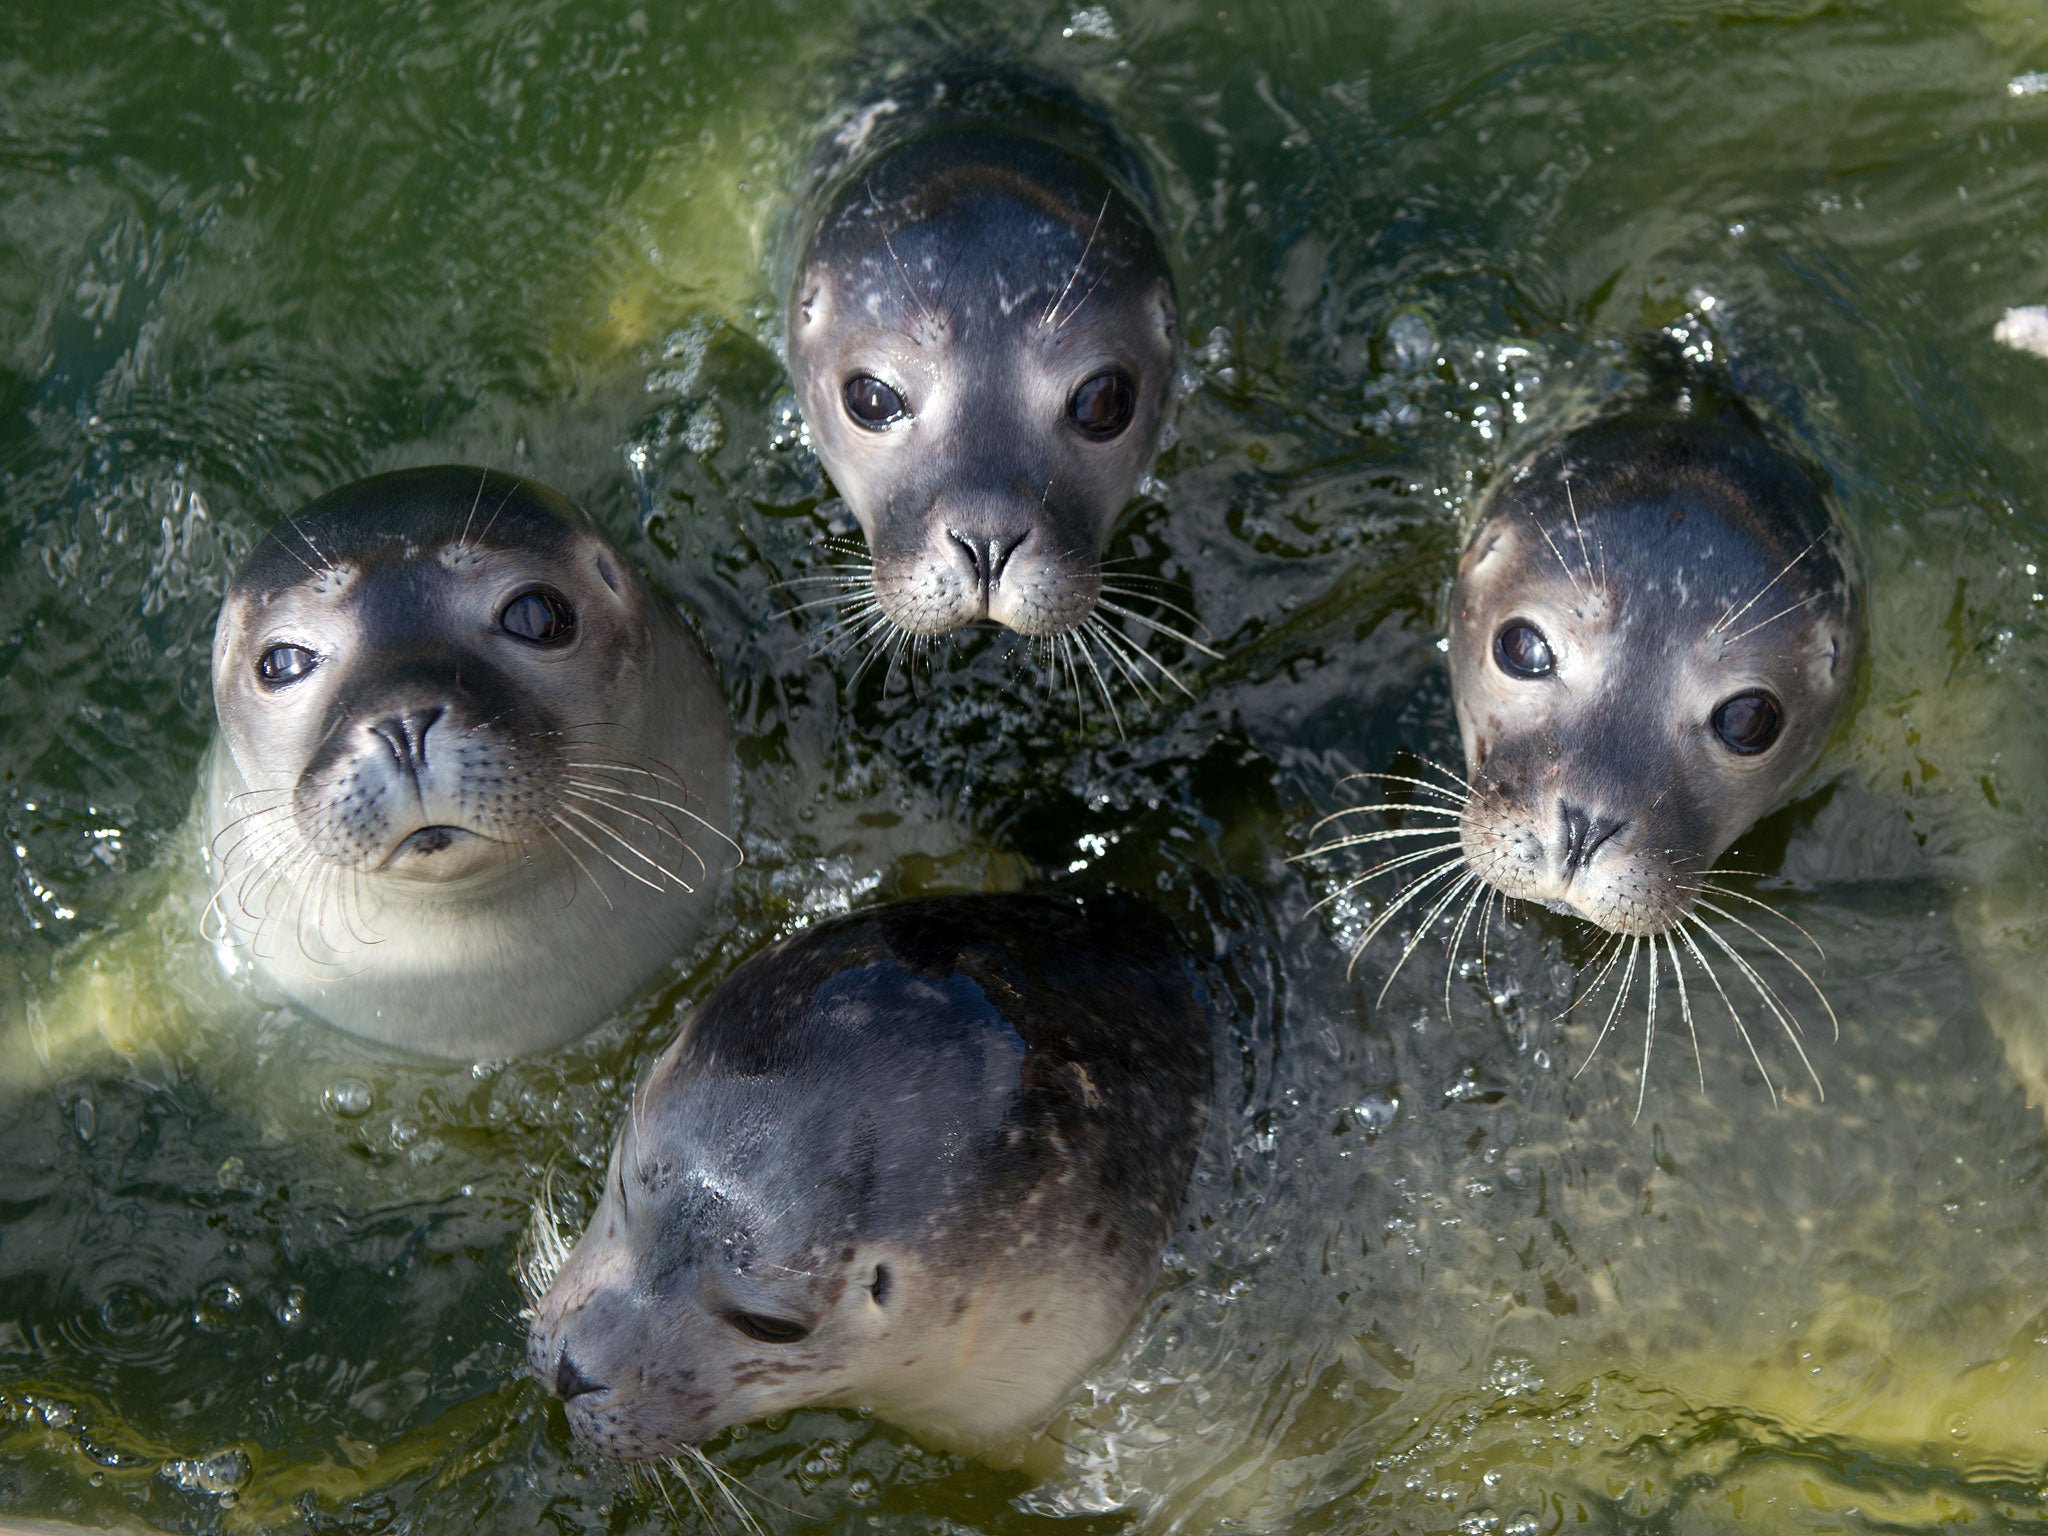 Seals will be recruited to take part in an attempt to study the Pine Island Glacier